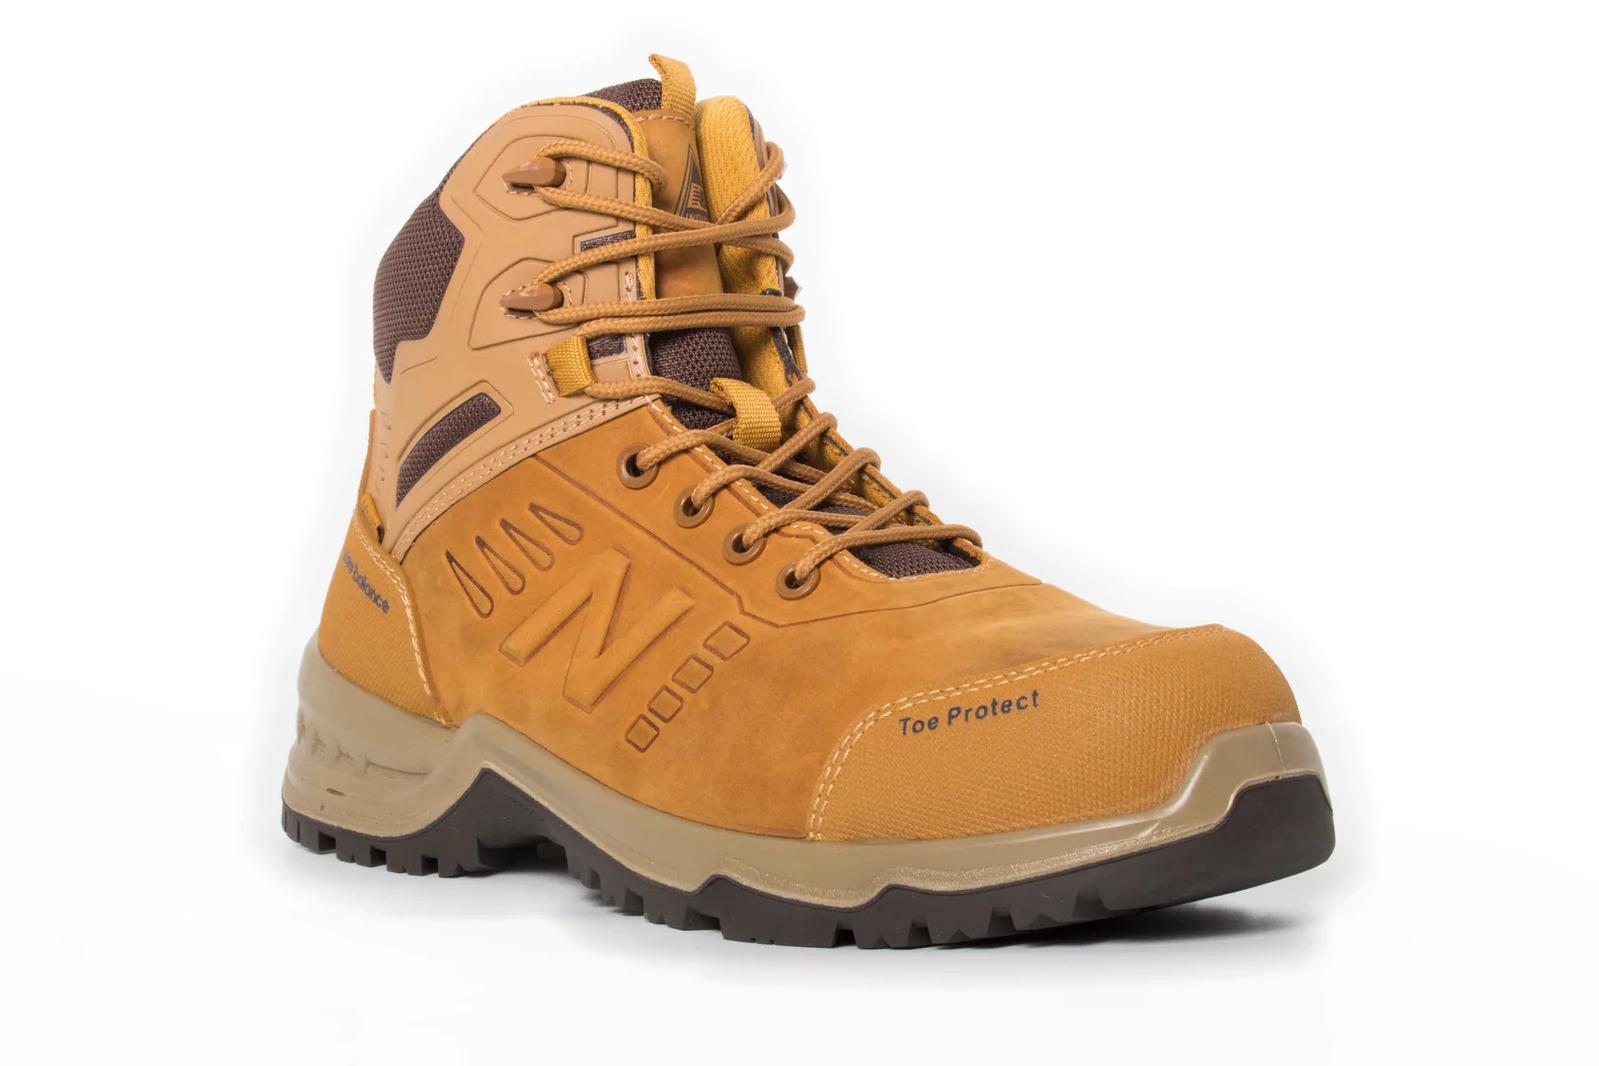 New Balance Mens Contour Steel Toe Cap Safety Work Boots with Zip - Wheat - US 11.5 Width:2E